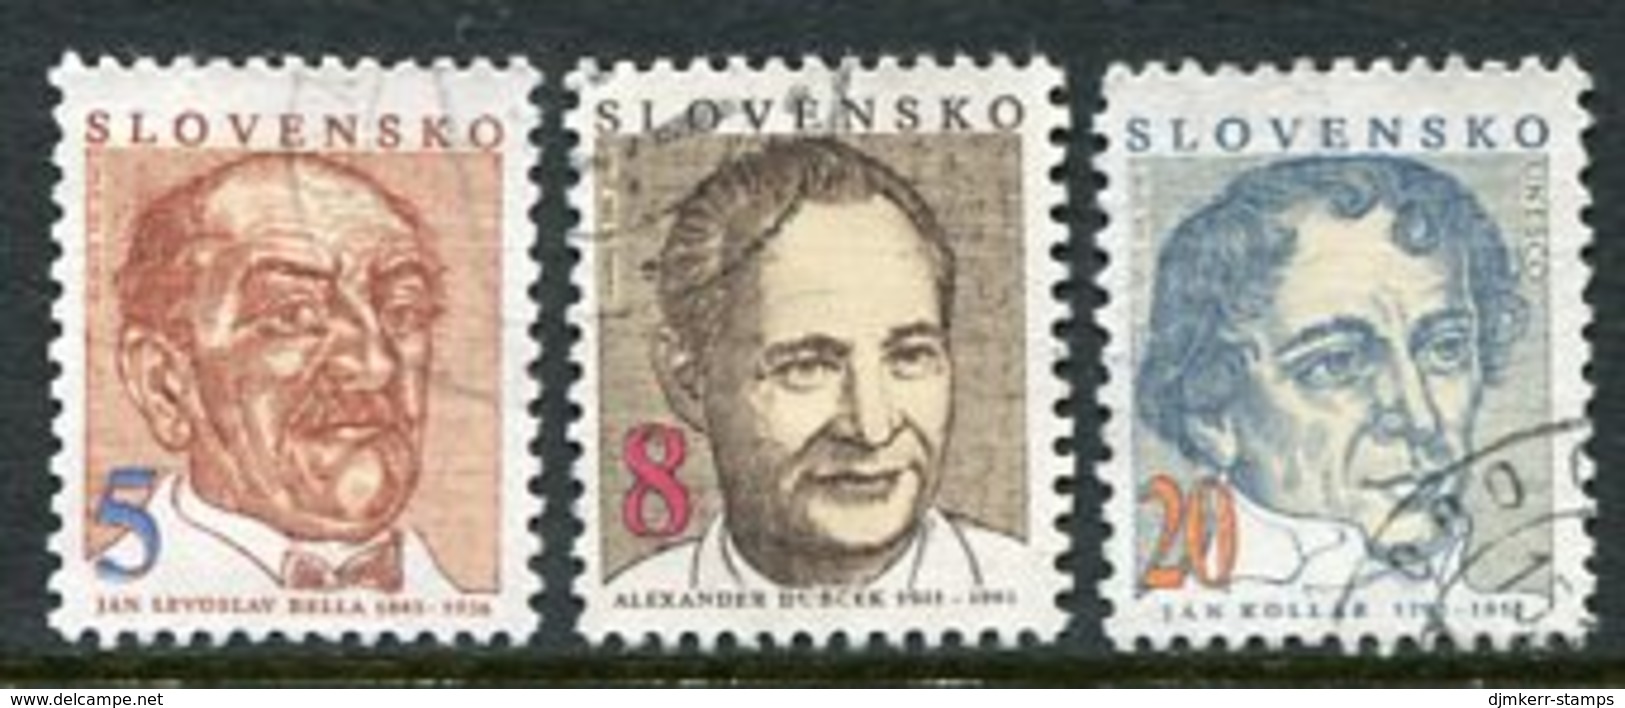 SLOVAKIA 1993 Personalities  Used.  Michel 171-73 - Used Stamps